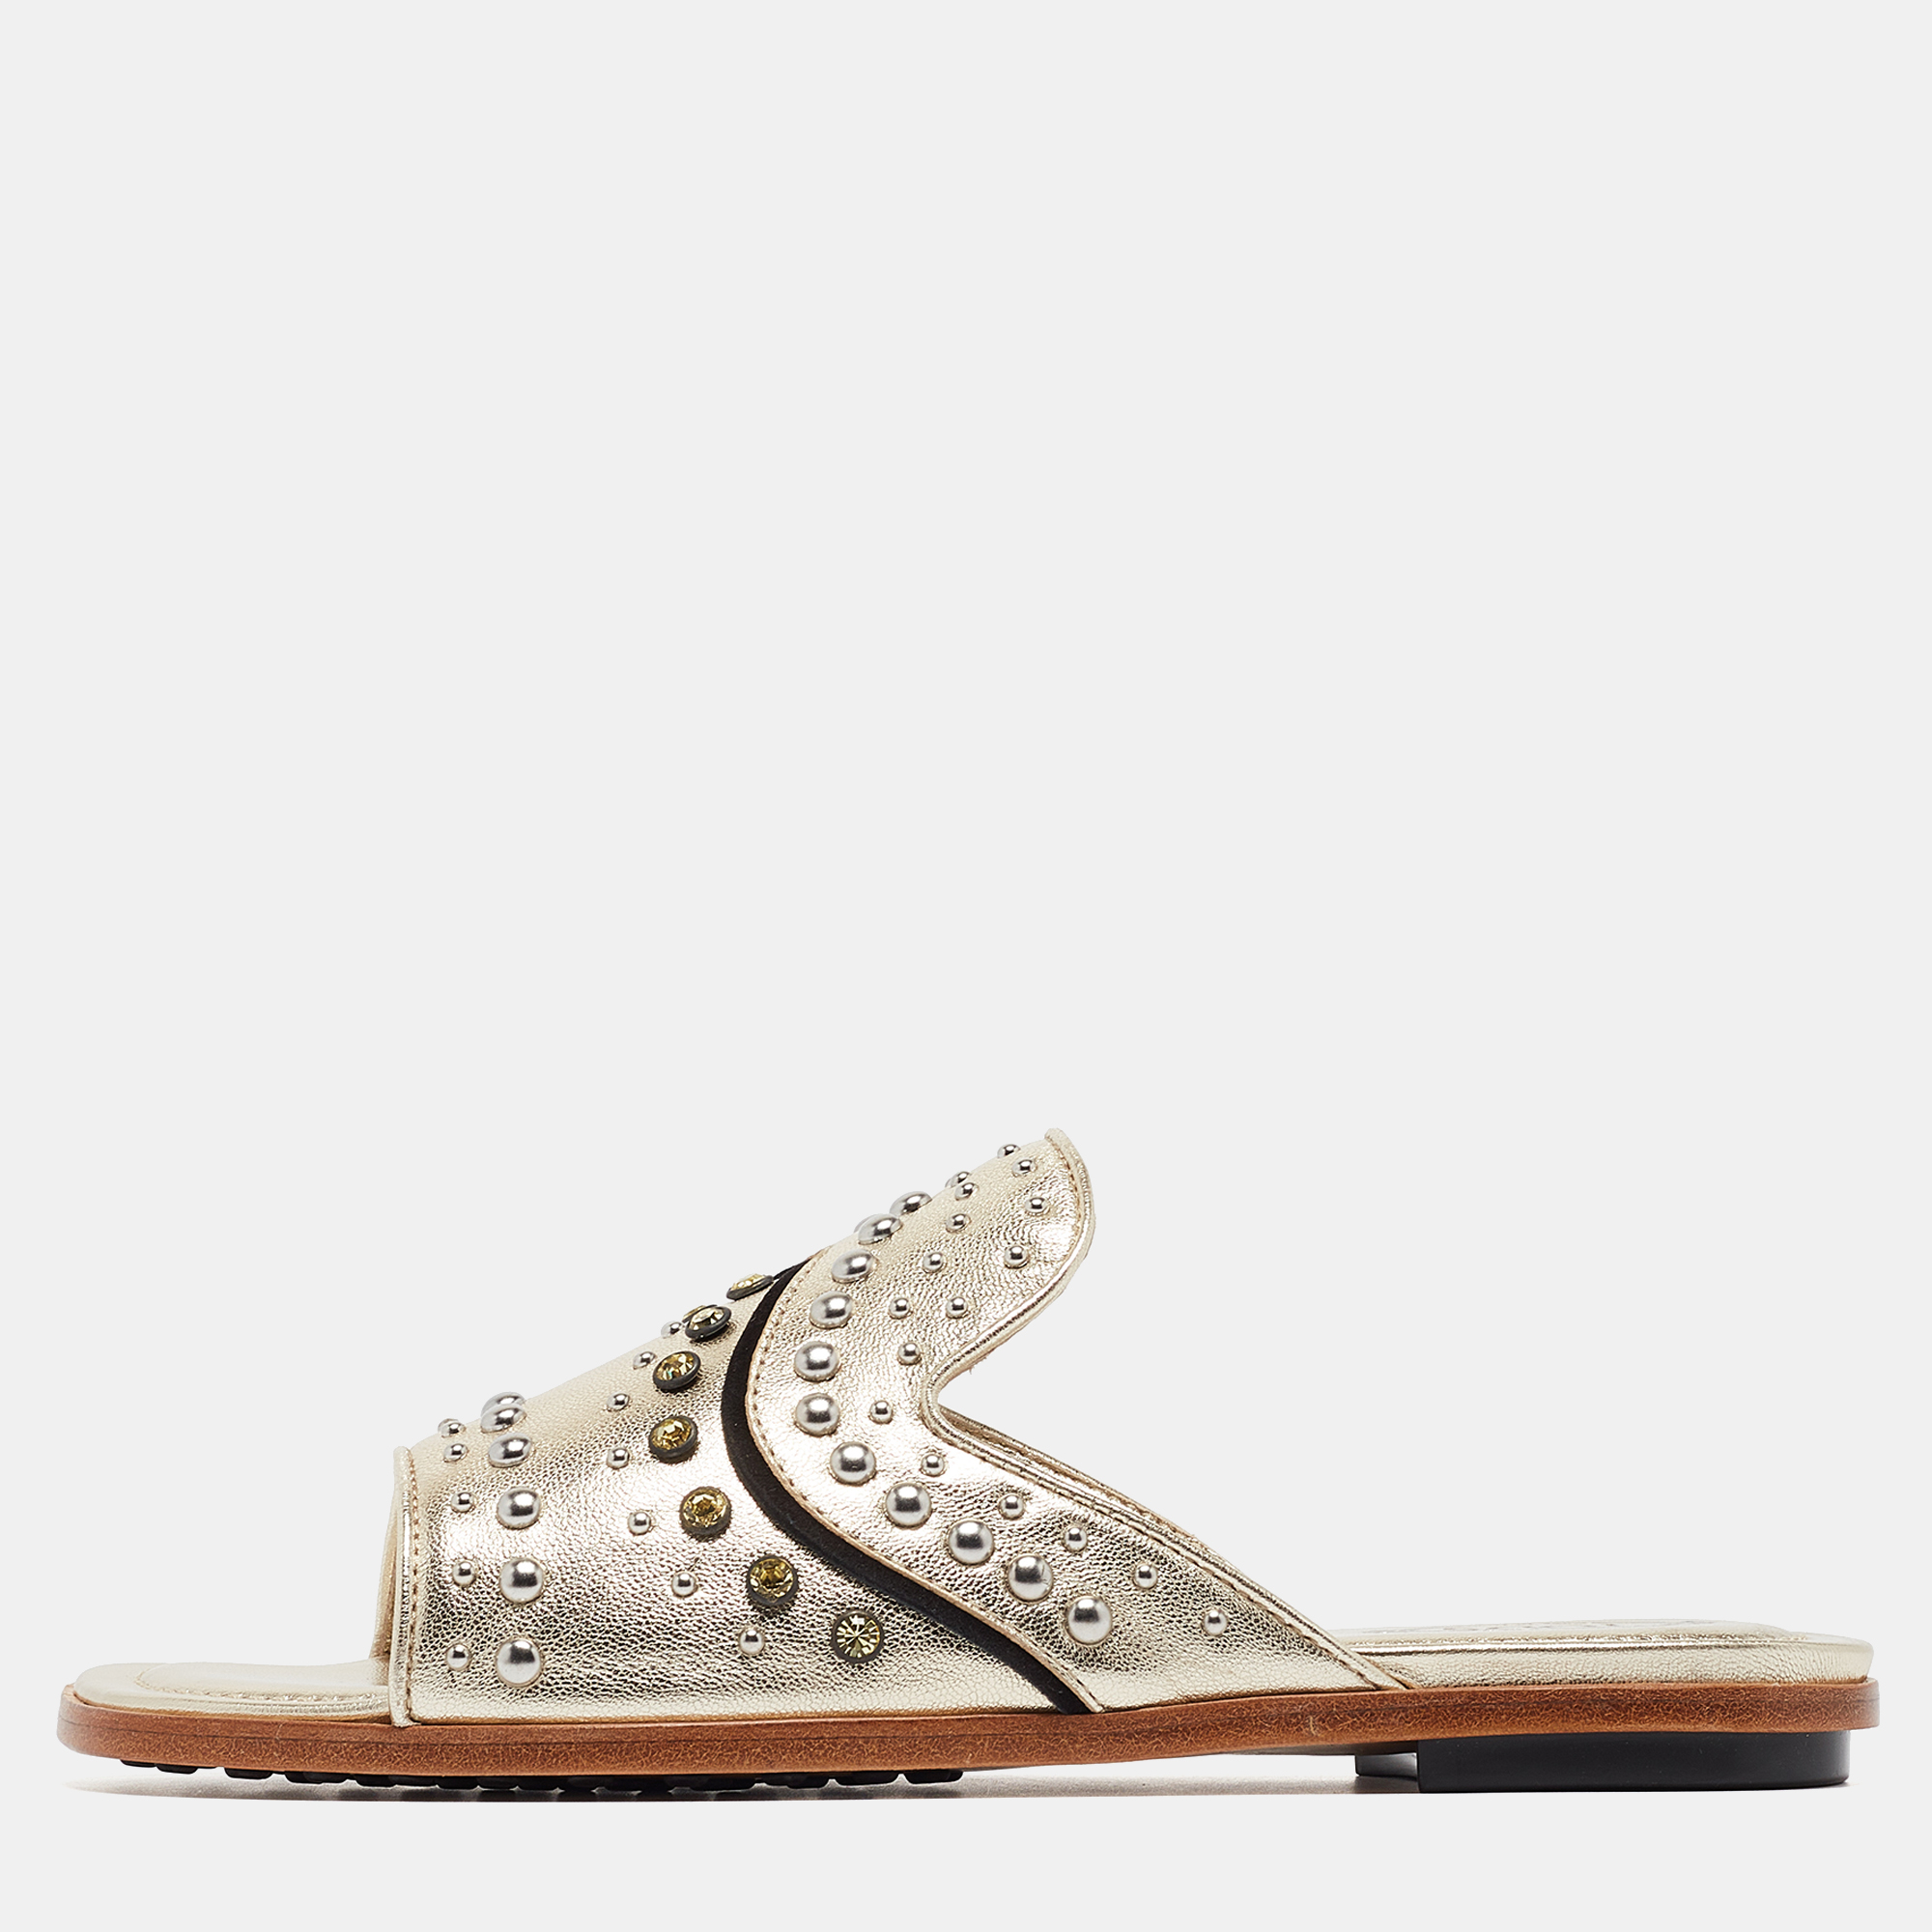 Pre-owned Tod's Metallic Gold Leather Studded Embellished Flat Slides Size 37.5